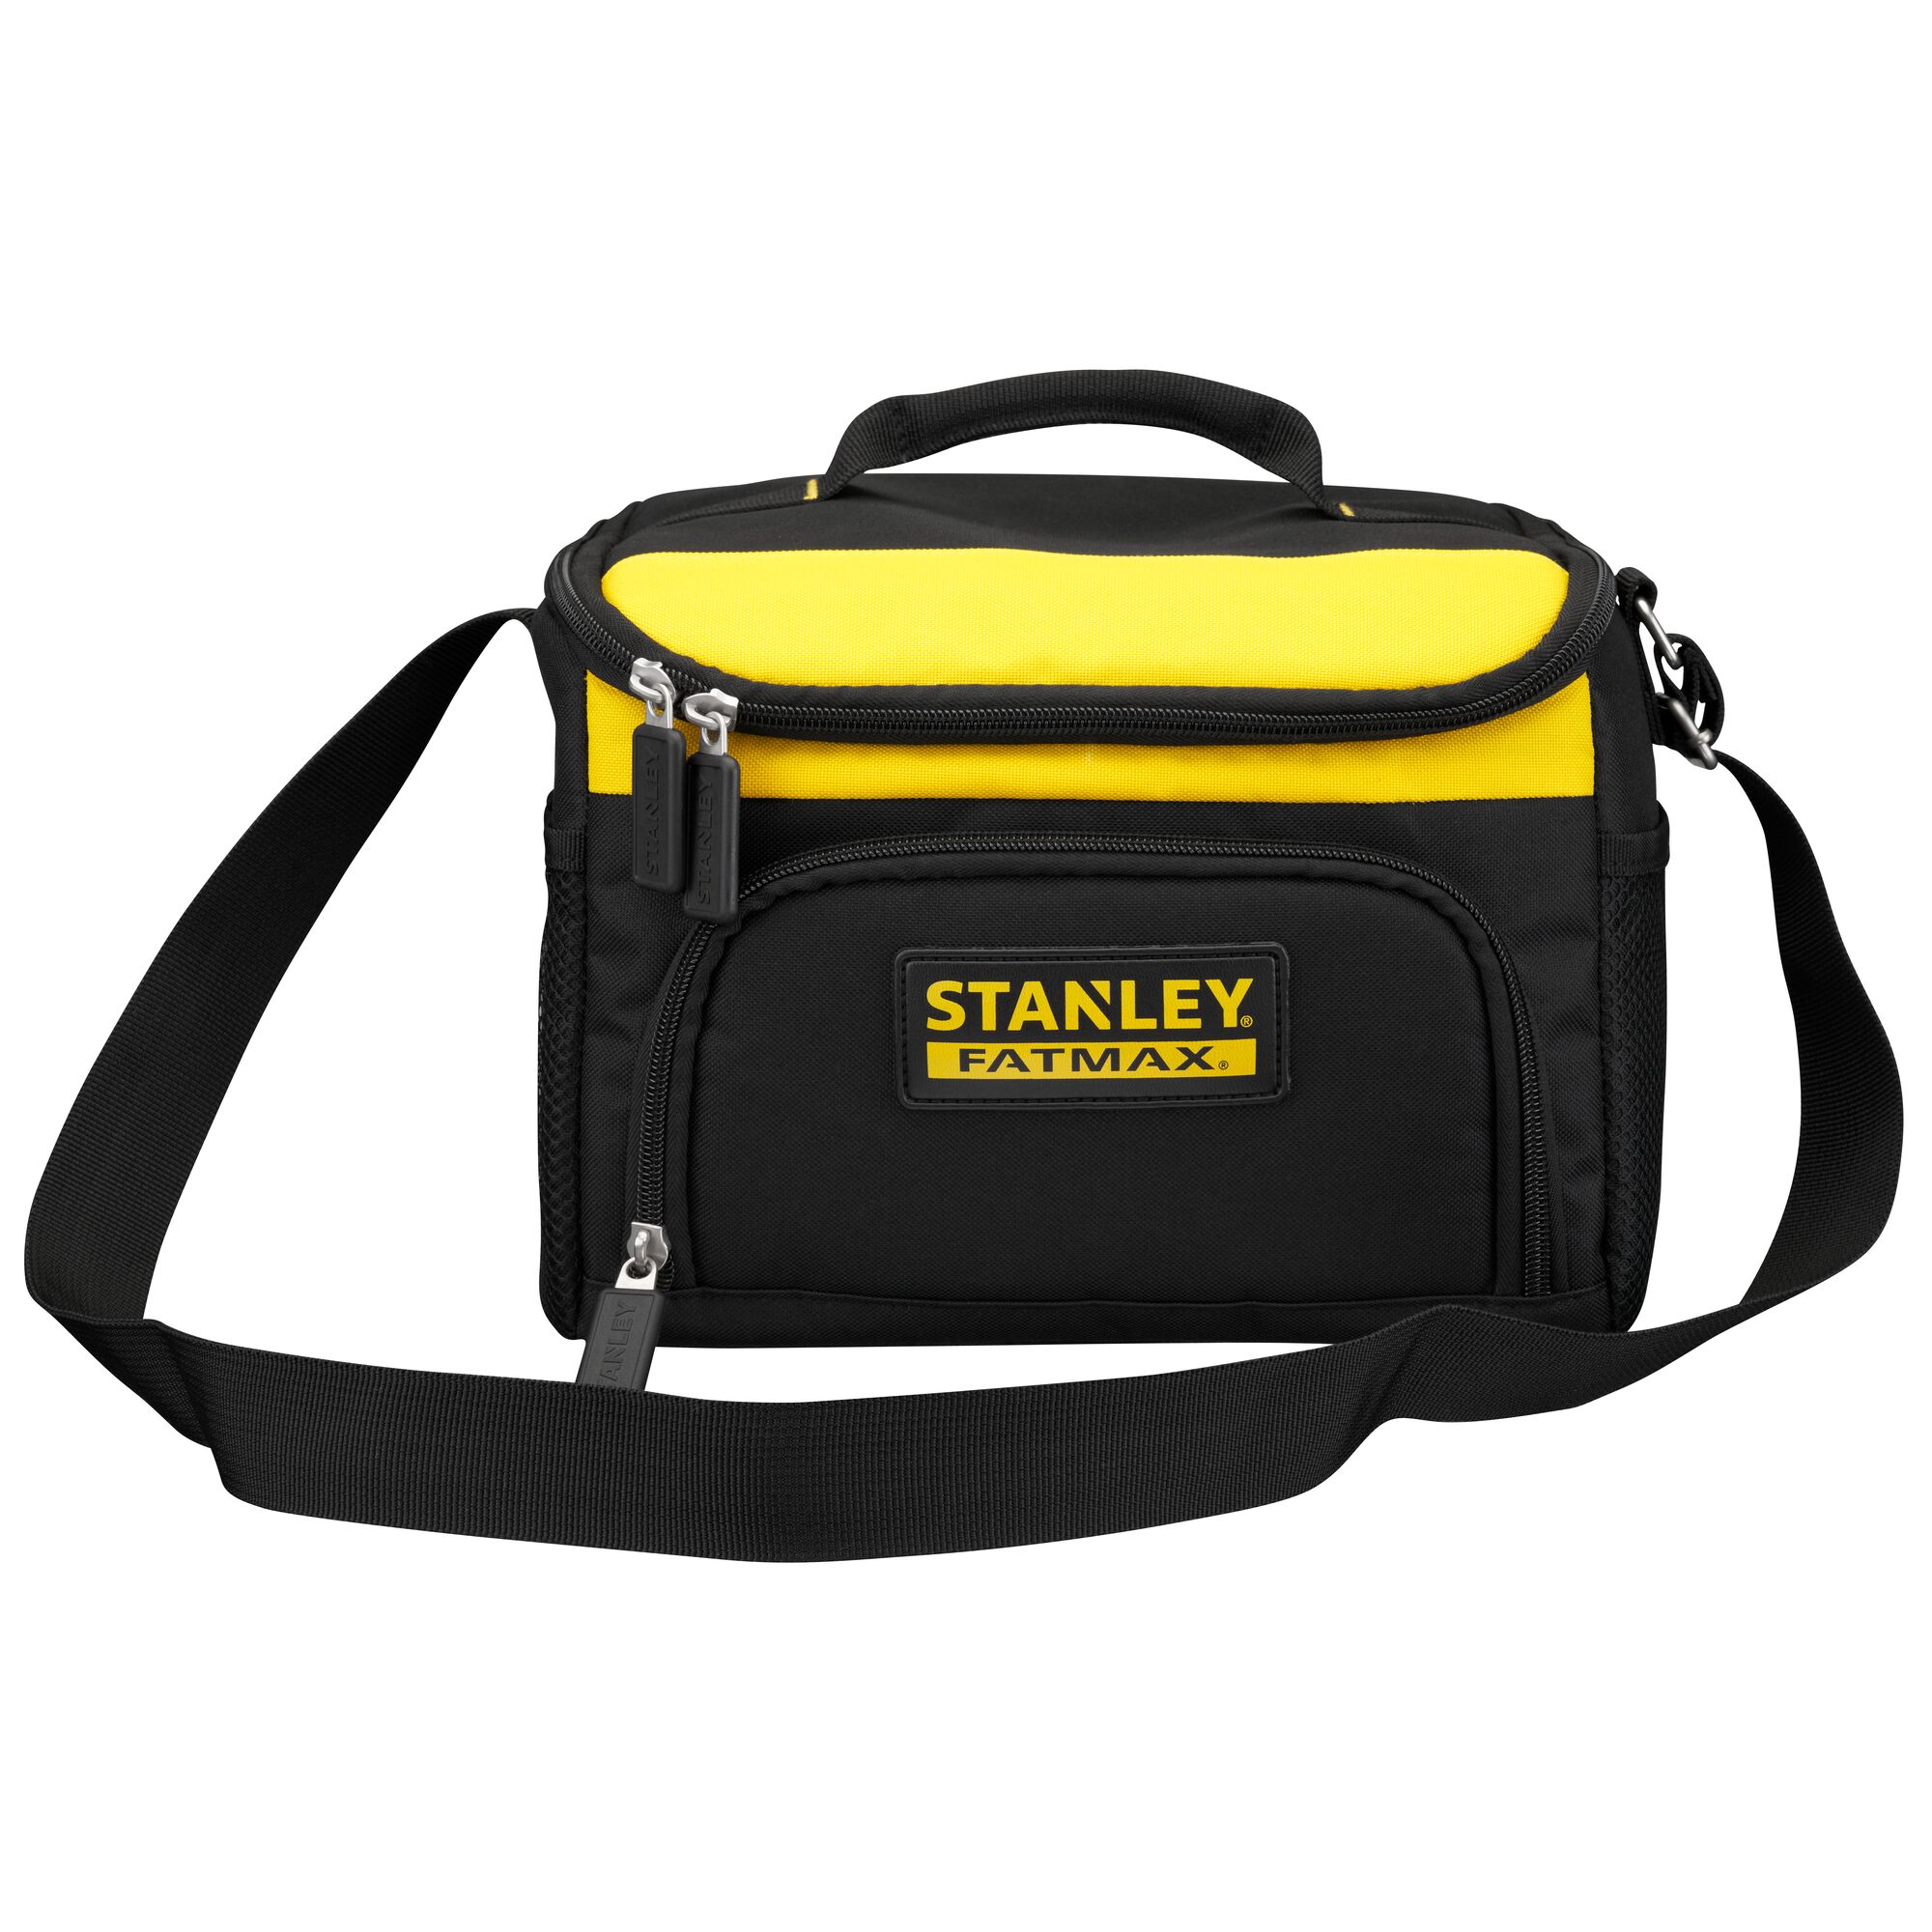 Stanley FatMax Tool Bag : Luggage Review